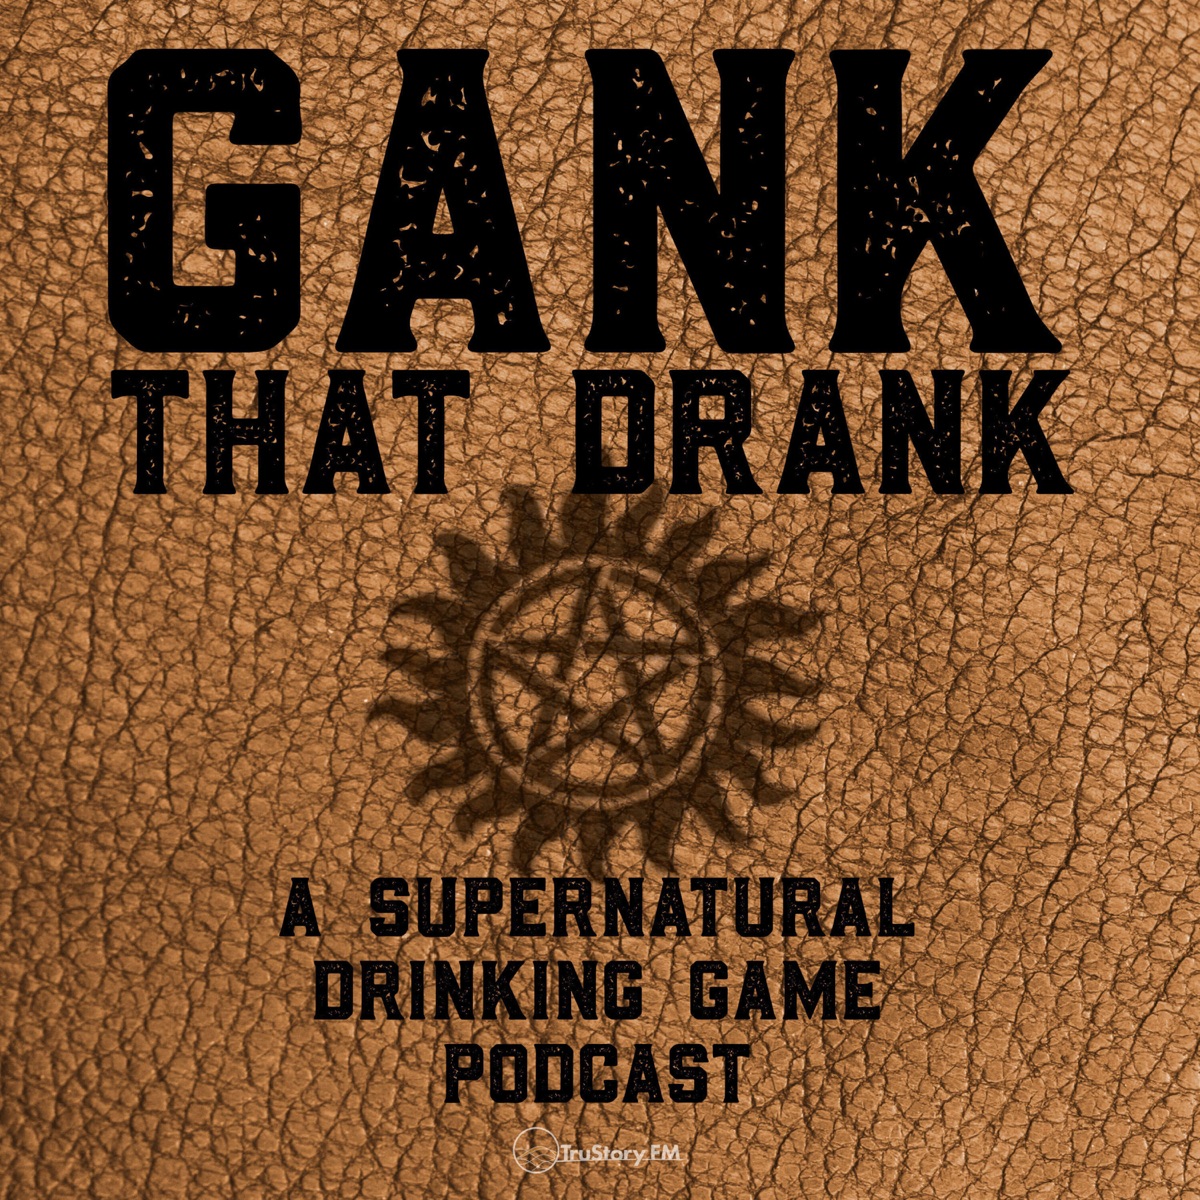 Gank That Drank: A Supernatural Drinking Game Podcast – Podcast – Podtail